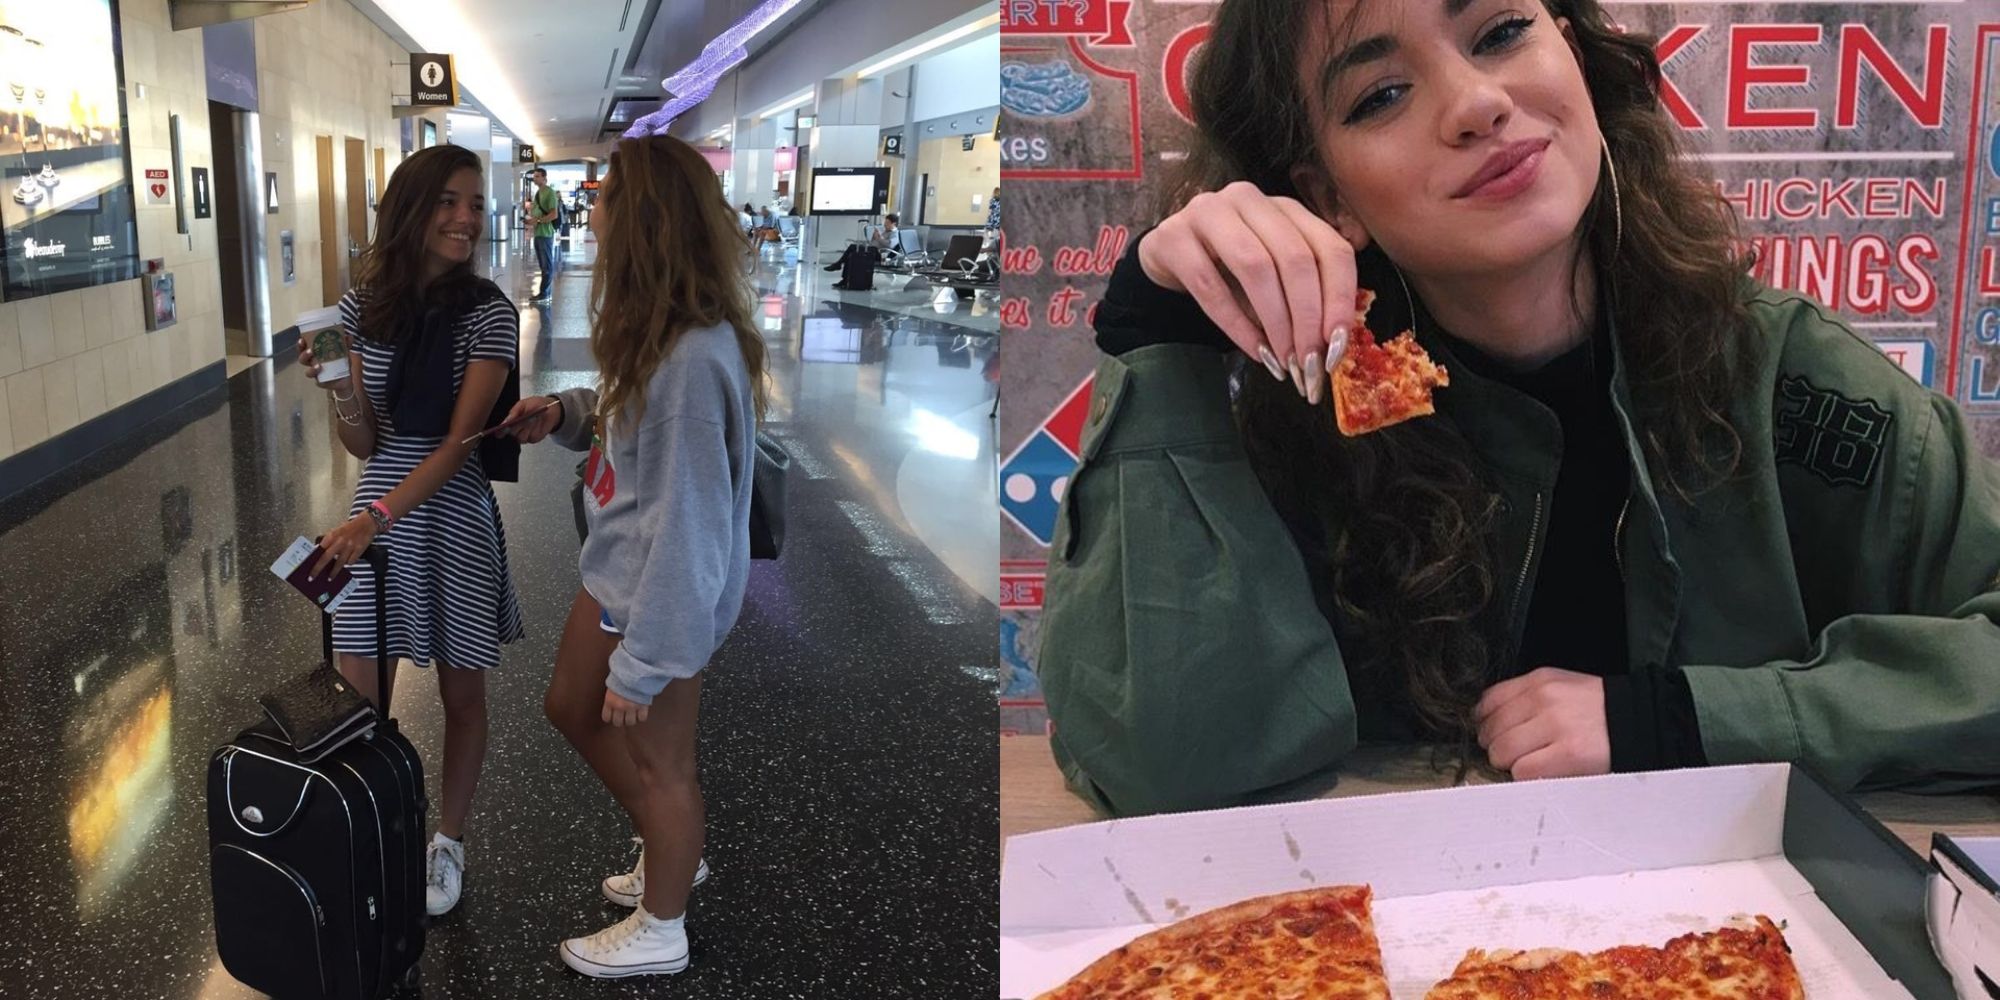 girls standing in airport and girl eating pizza